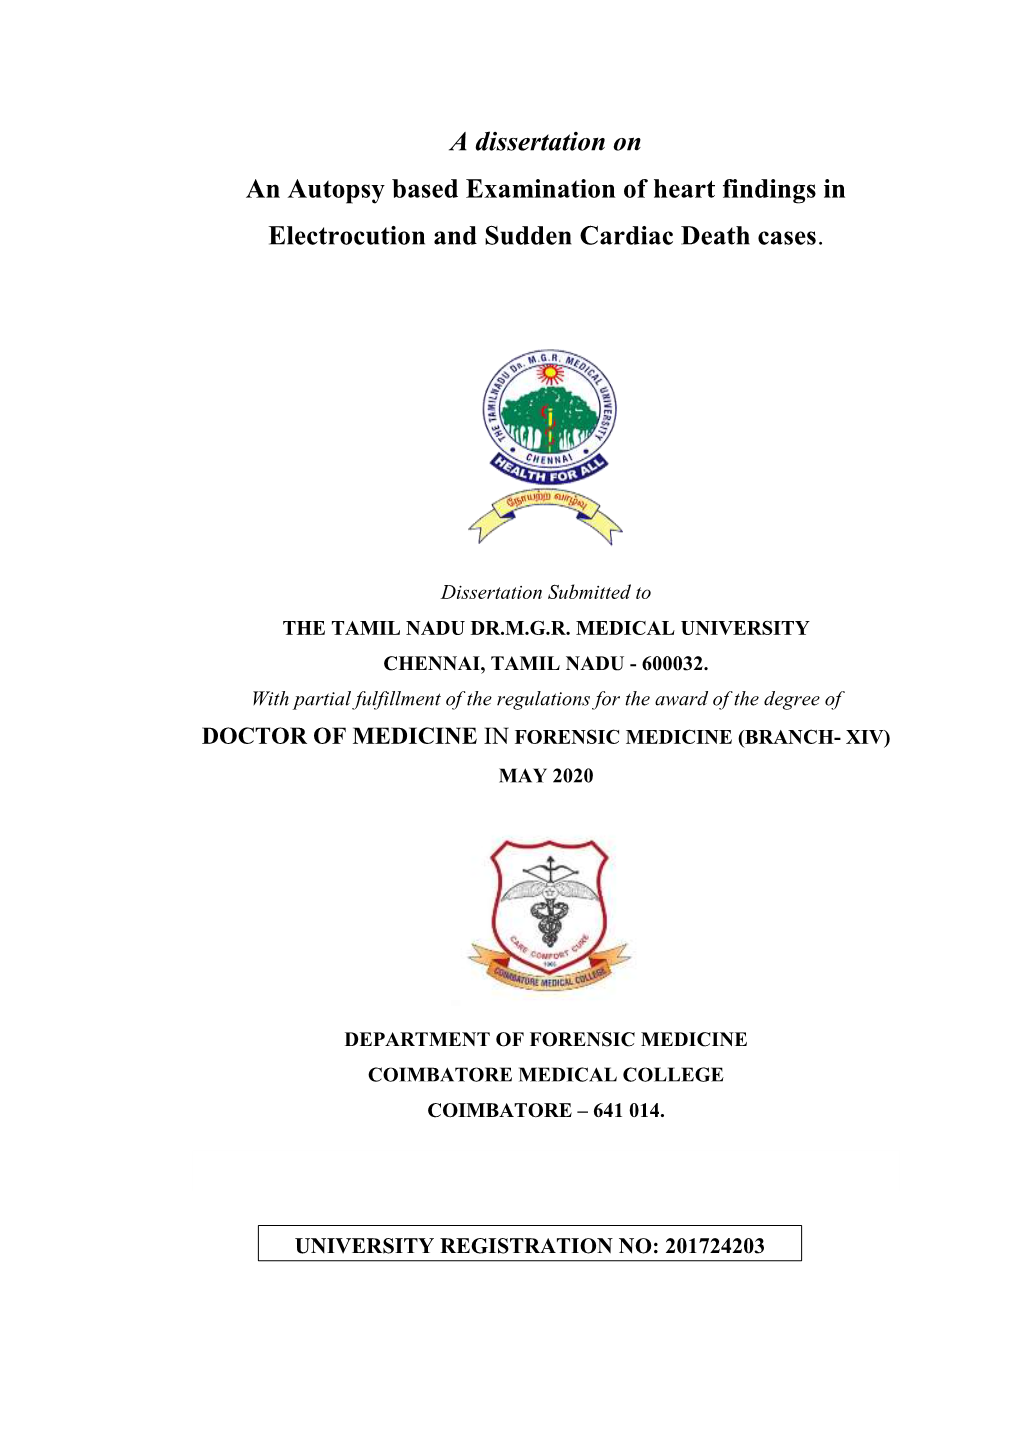 A Dissertation on an Autopsy Based Examination of Heart Findings In